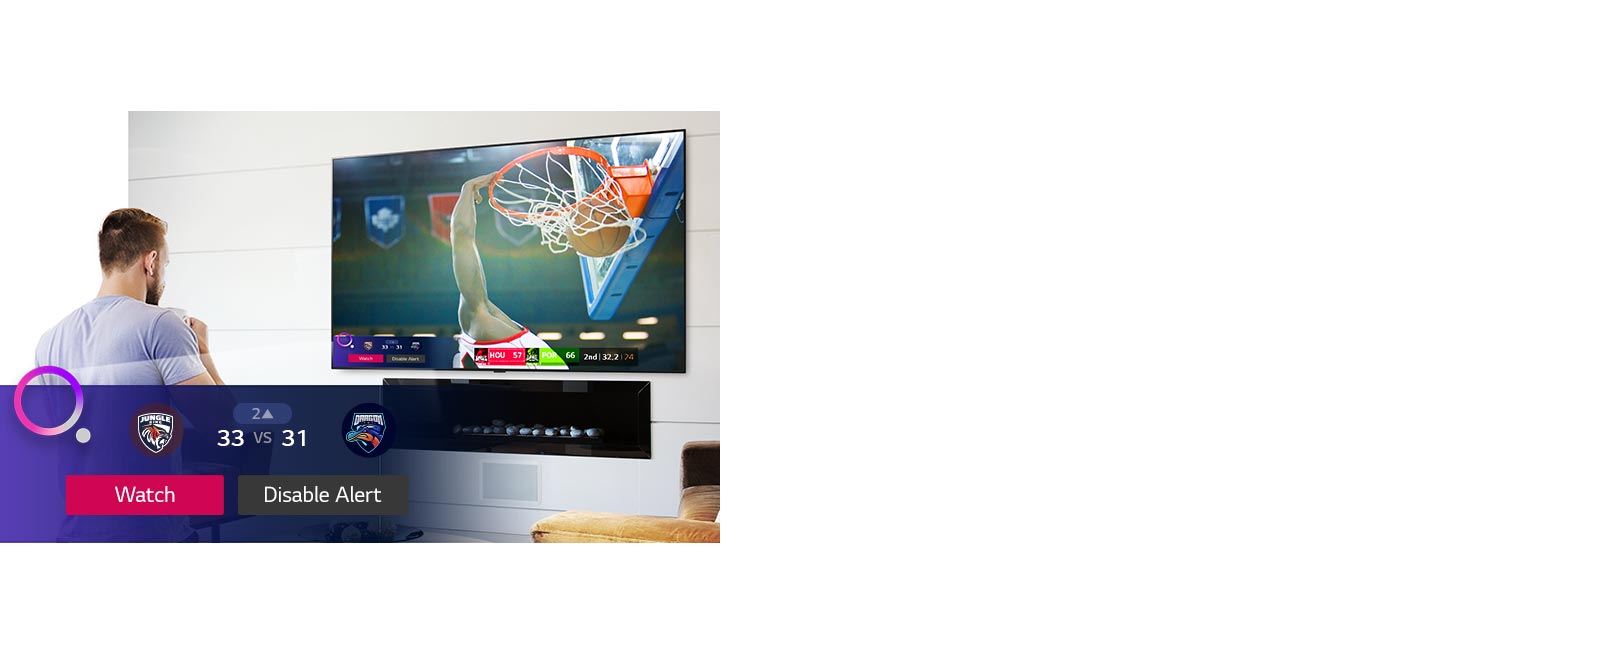 TV screen showing a scene from a basketball game with a Sports Alert